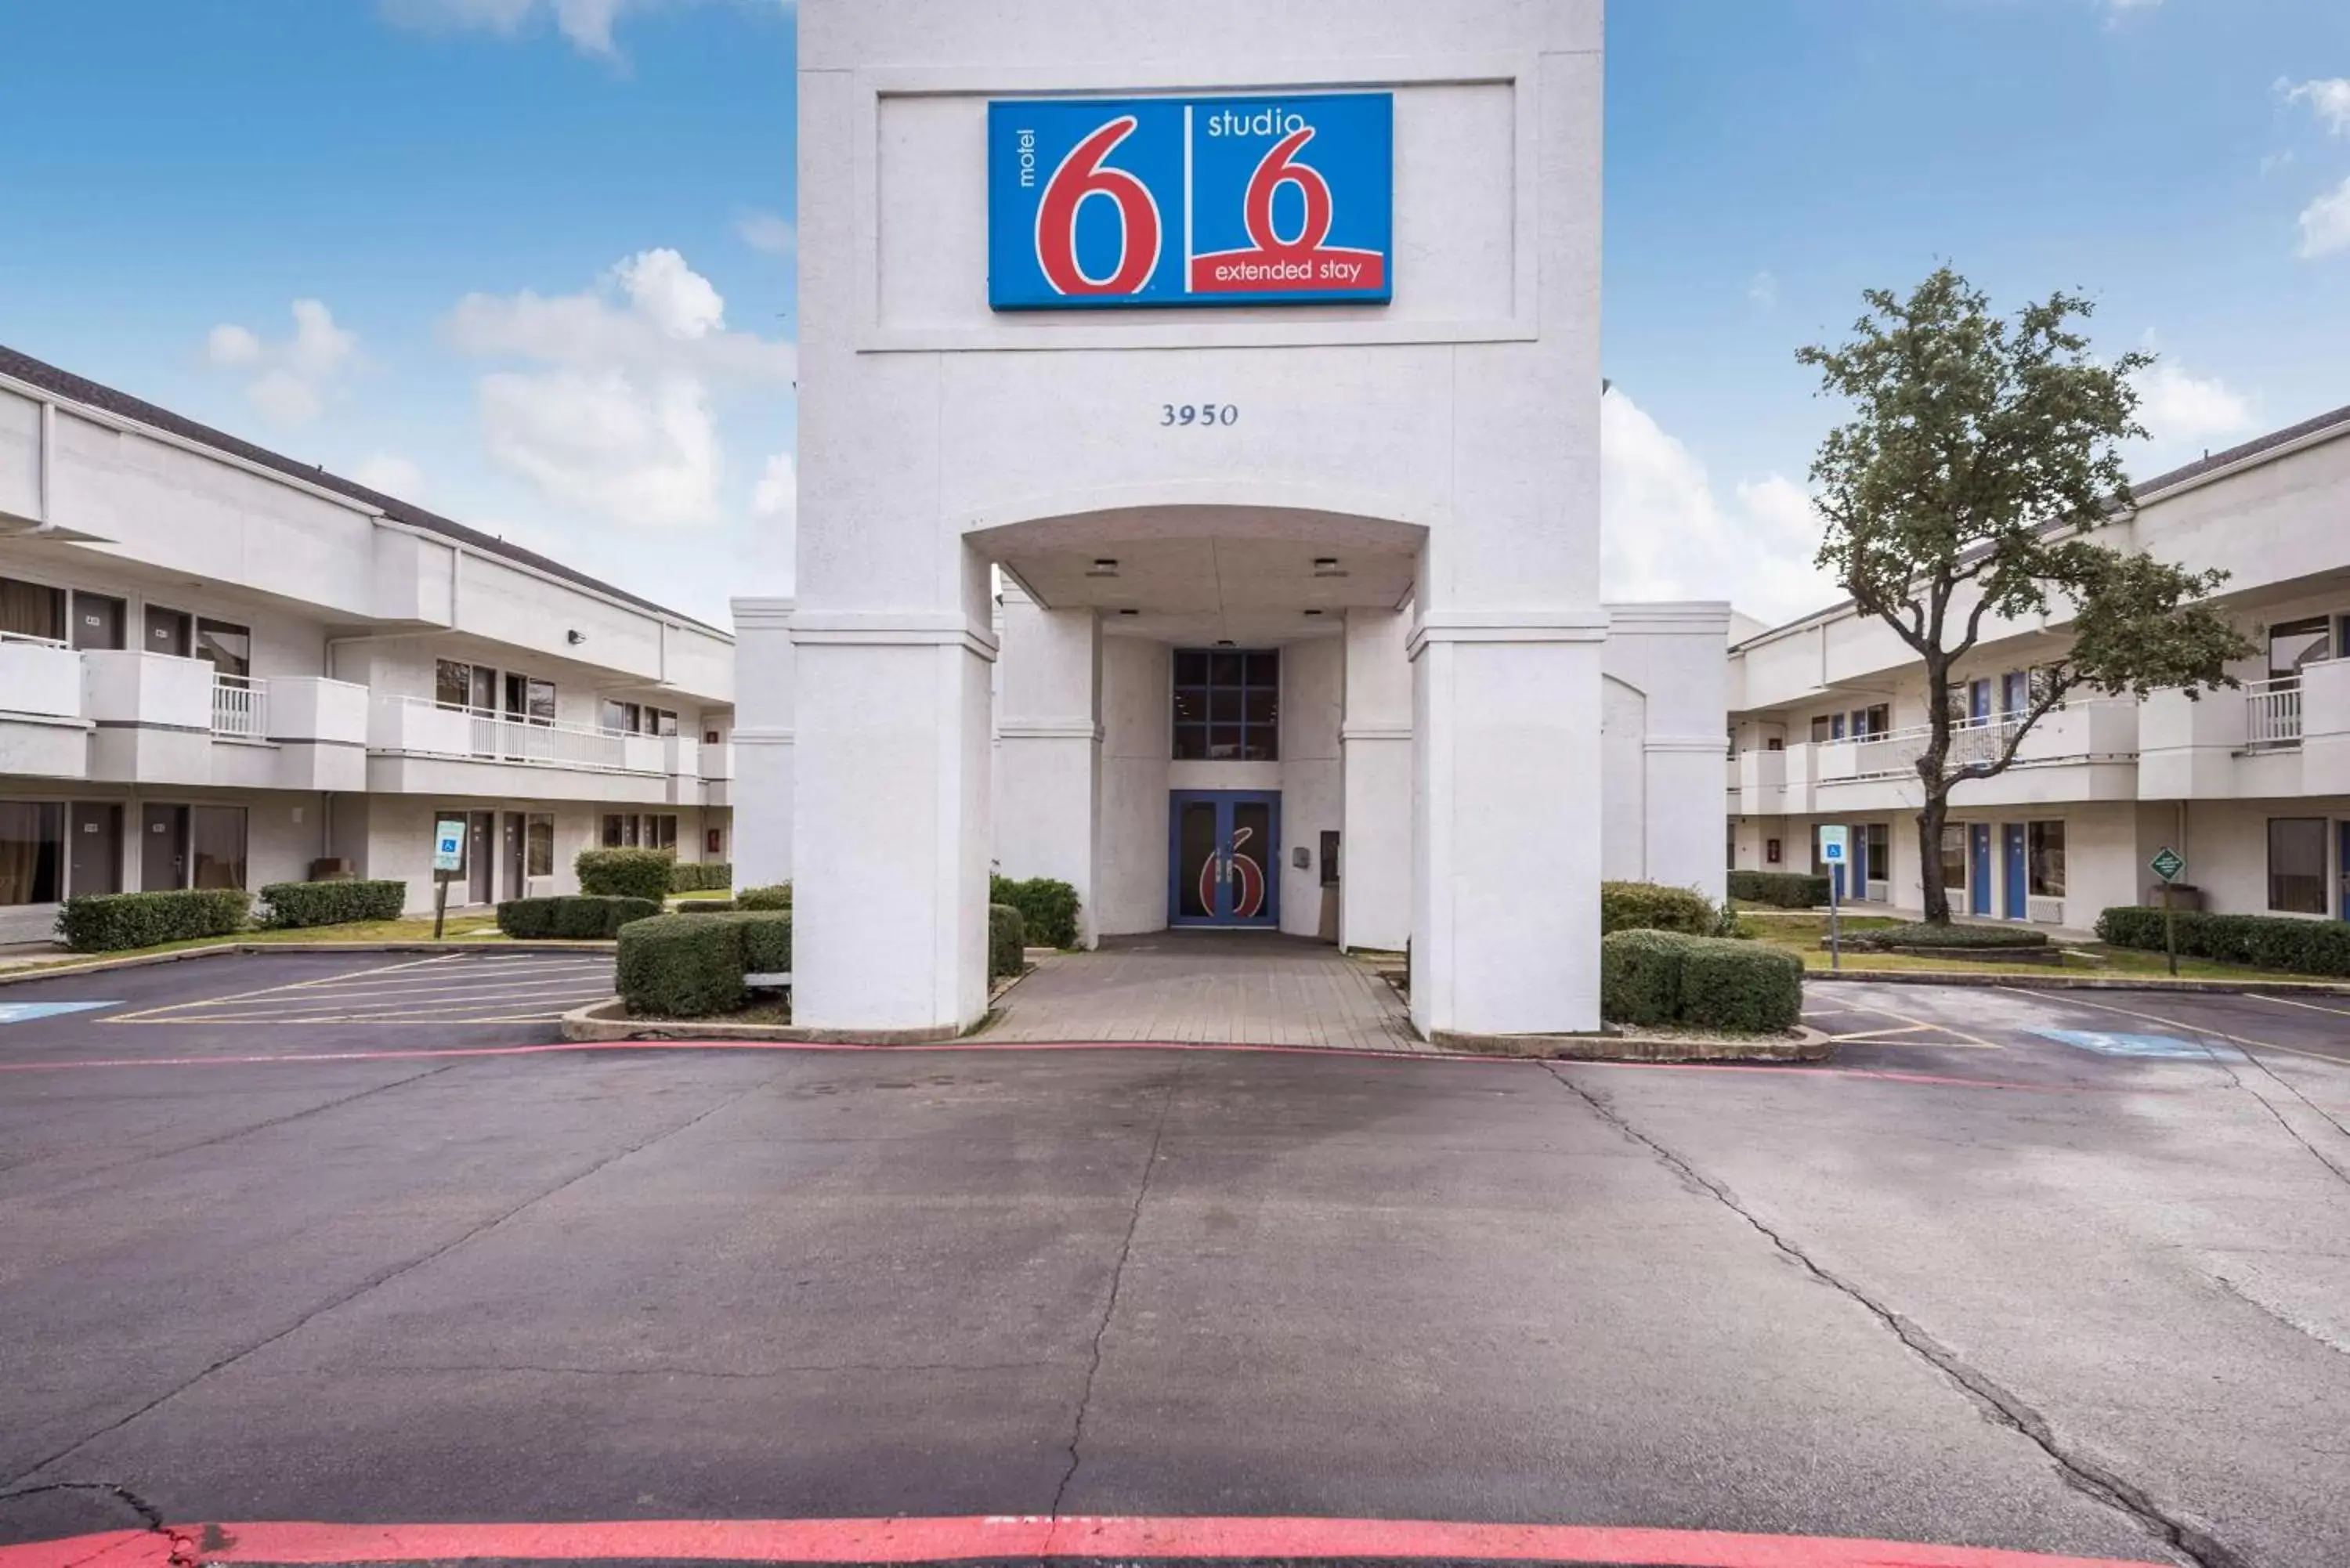 Property Building in Motel 6-Irving, TX - Irving DFW Airport East